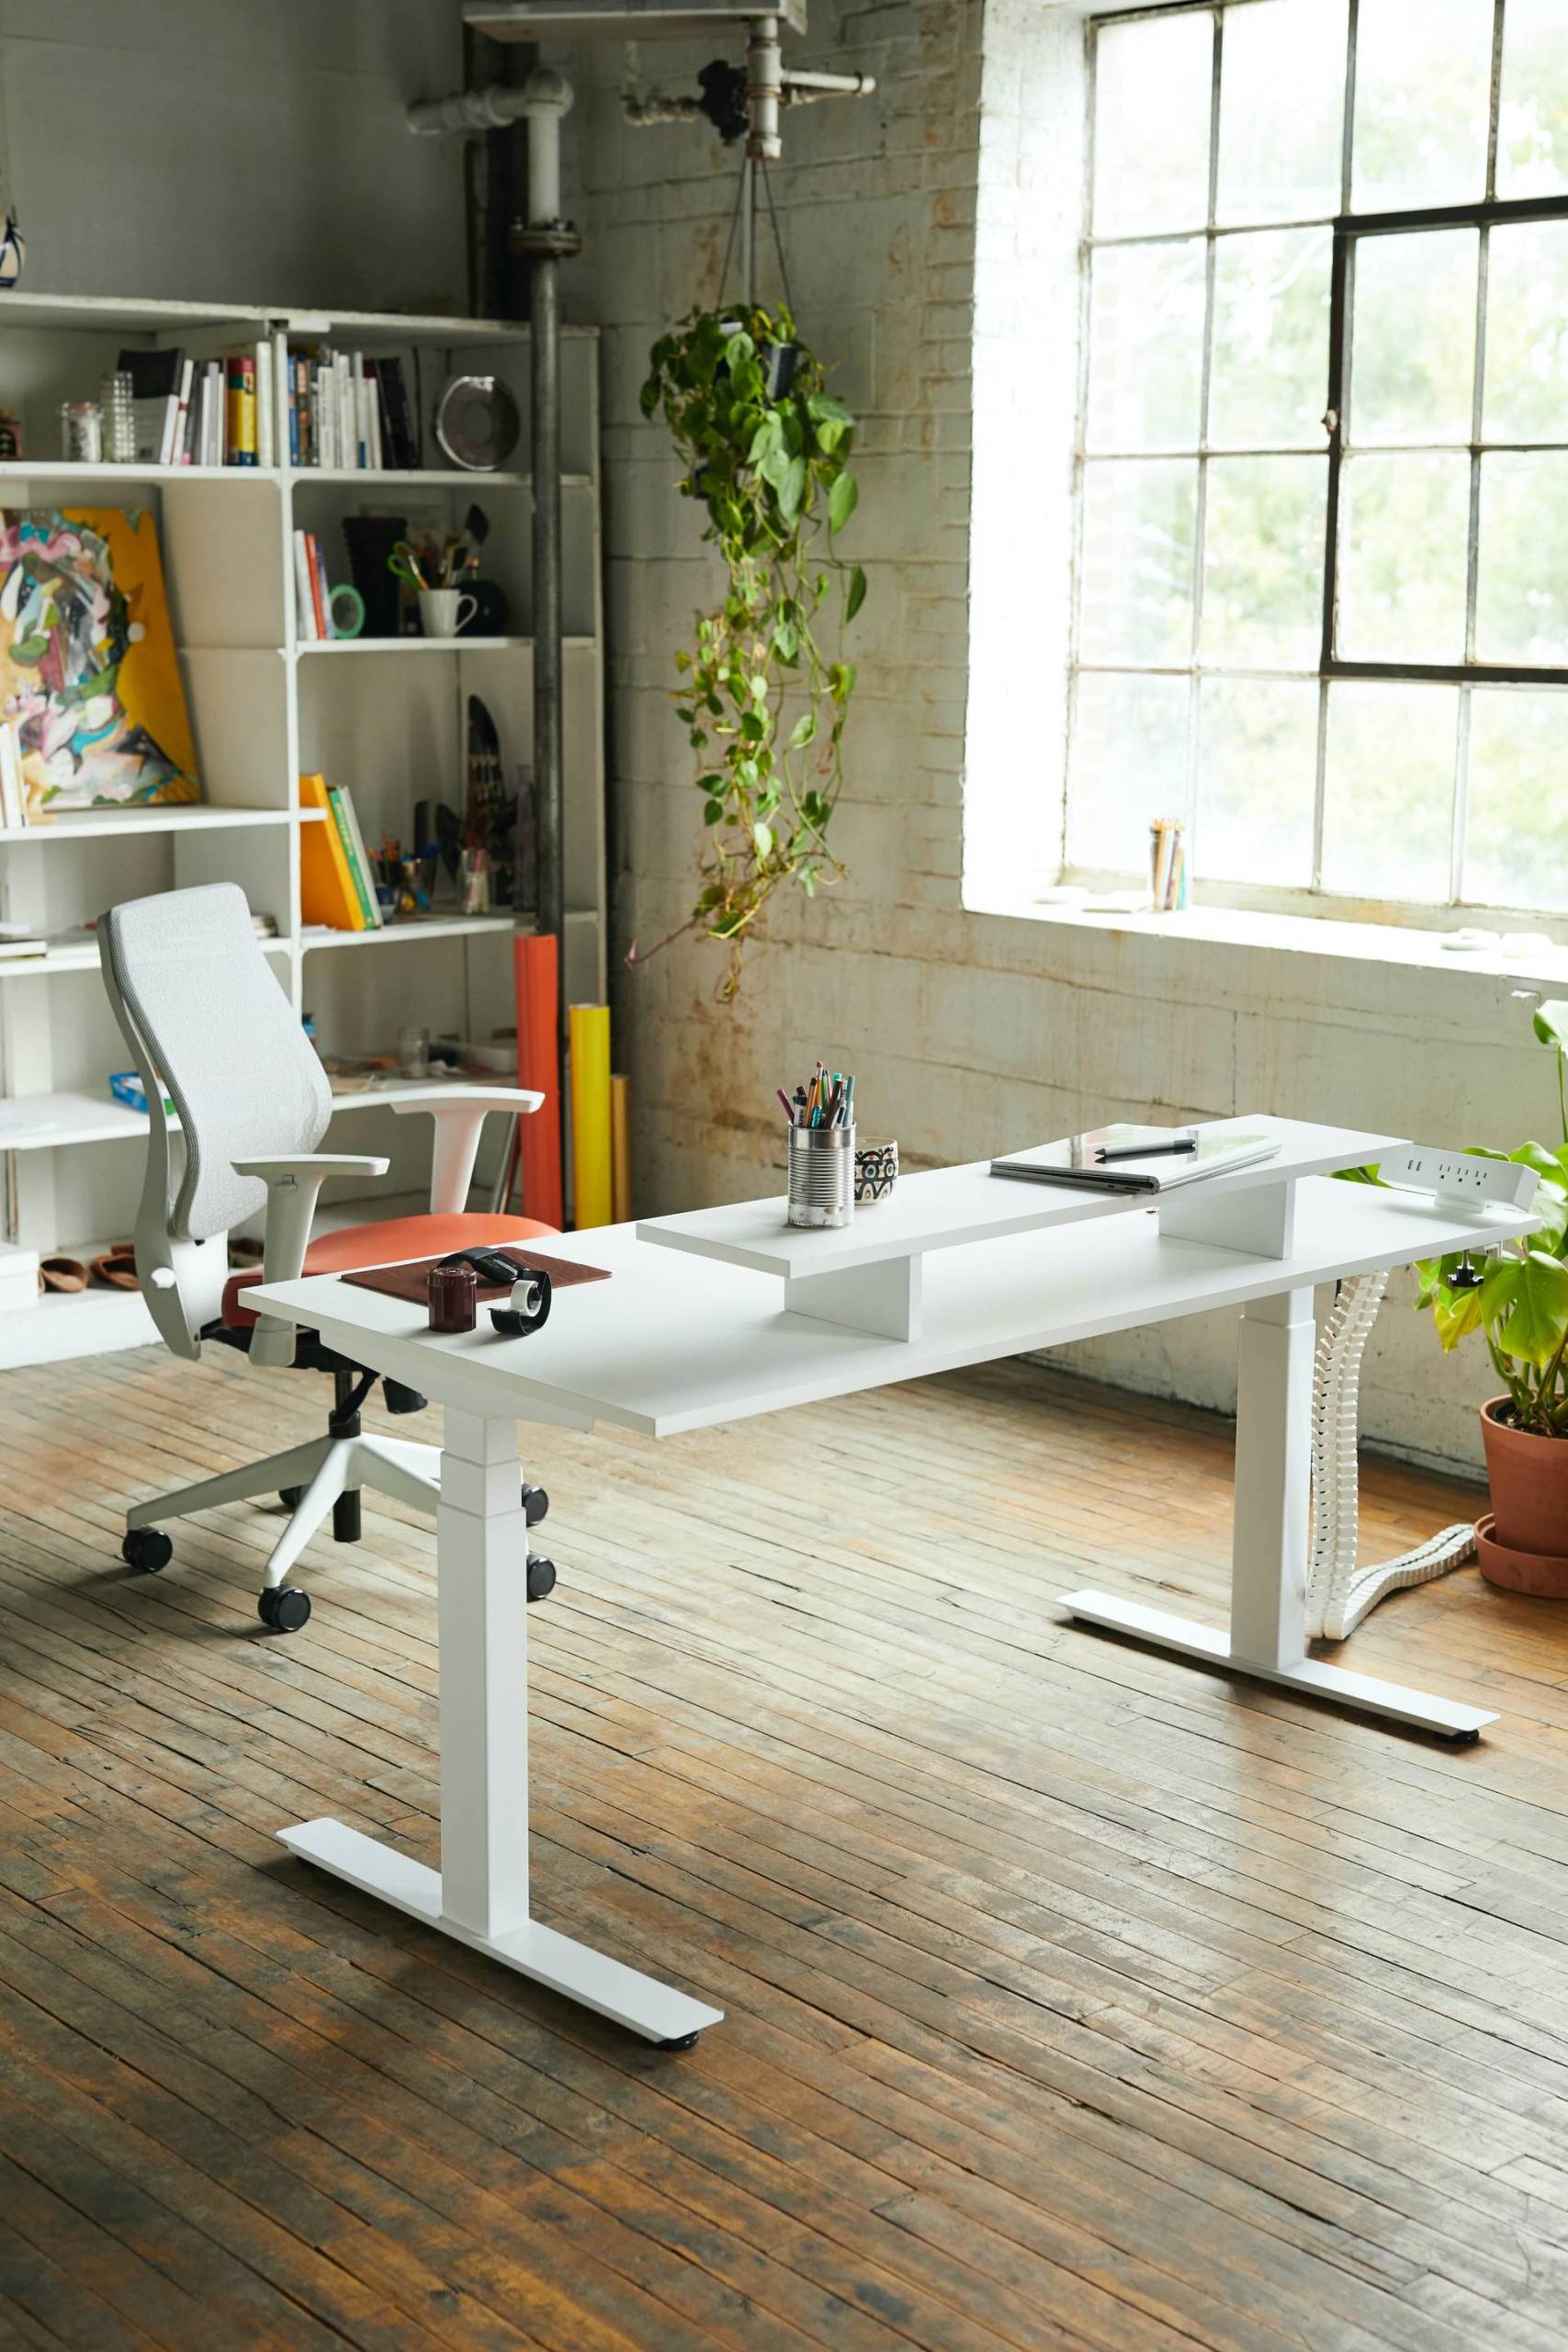 These pieces of WFH equipment can make working from home a lot easier on your employees, leaving them enough energy to work through the day and have time with their loved ones at home.